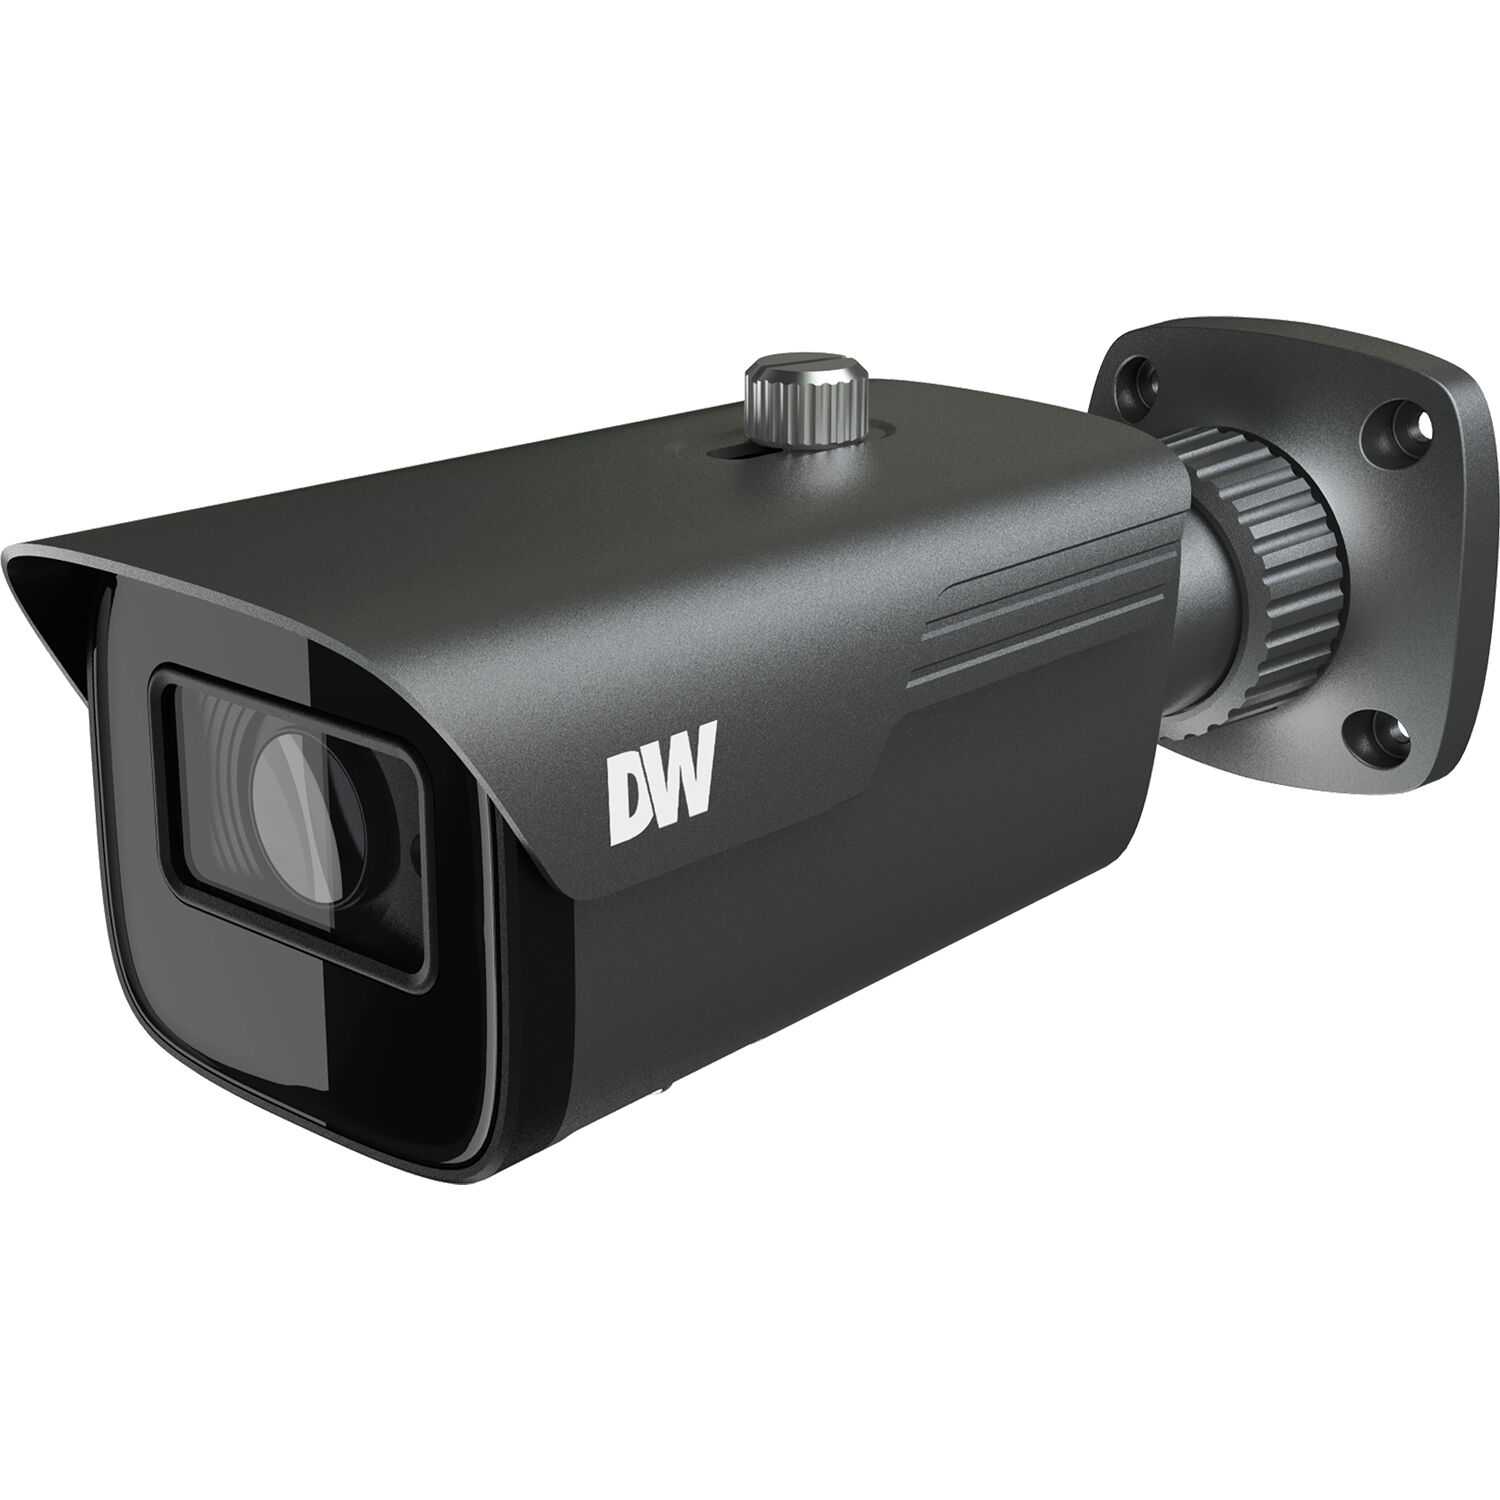 DWC-MB94WI28T | MEGApix 4MP vandal dome IP camera with fixed lens options and IR